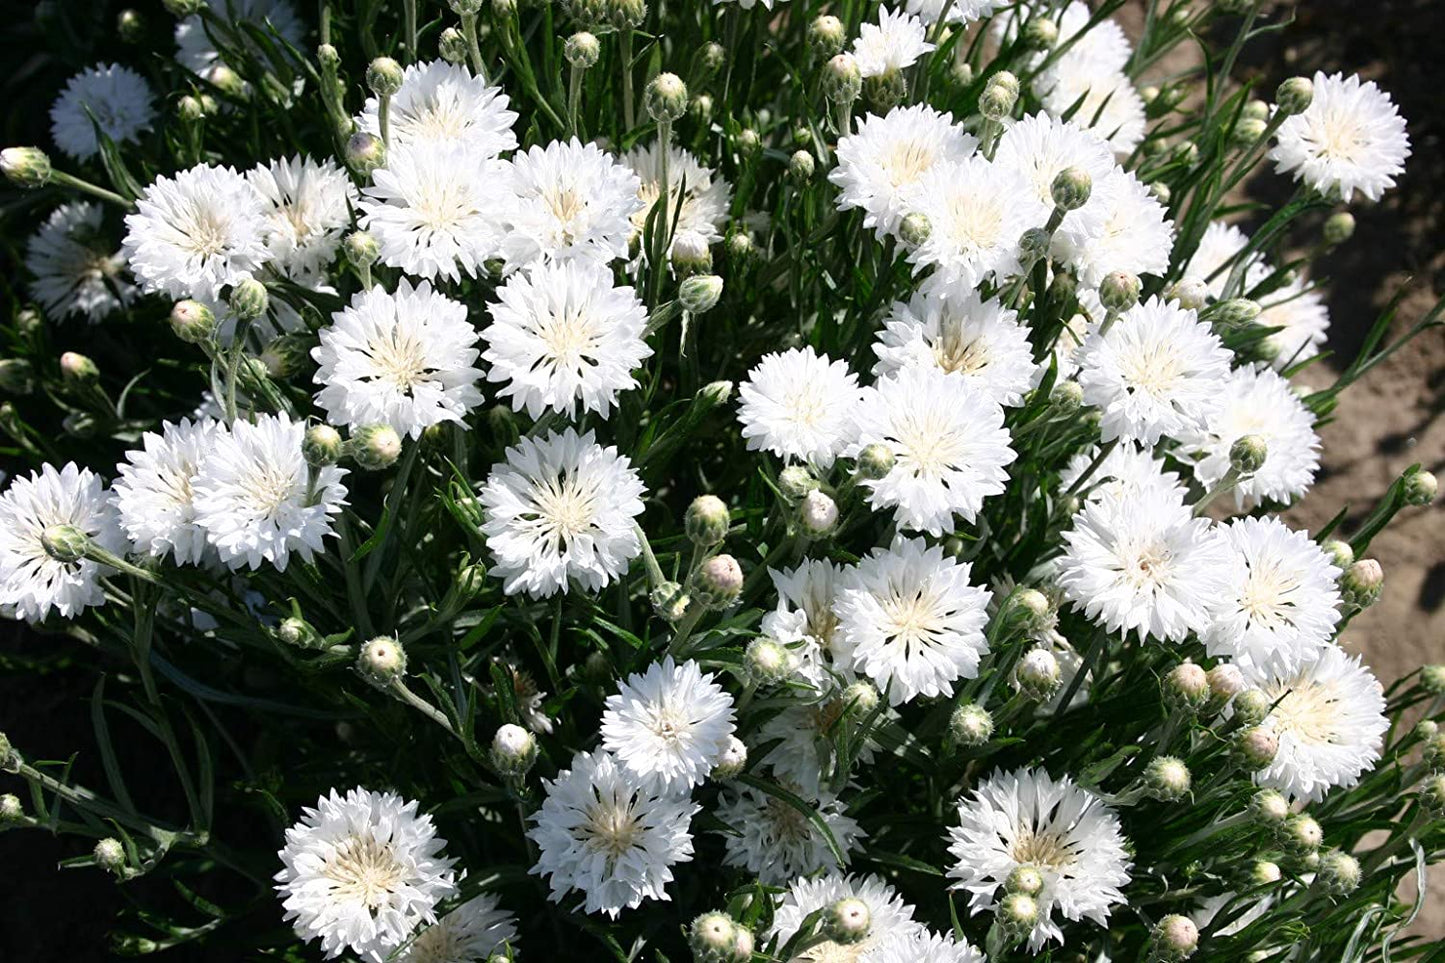 Bachelor Button Dwarf White, 200 Seeds Per Packet, Non GMO Seeds